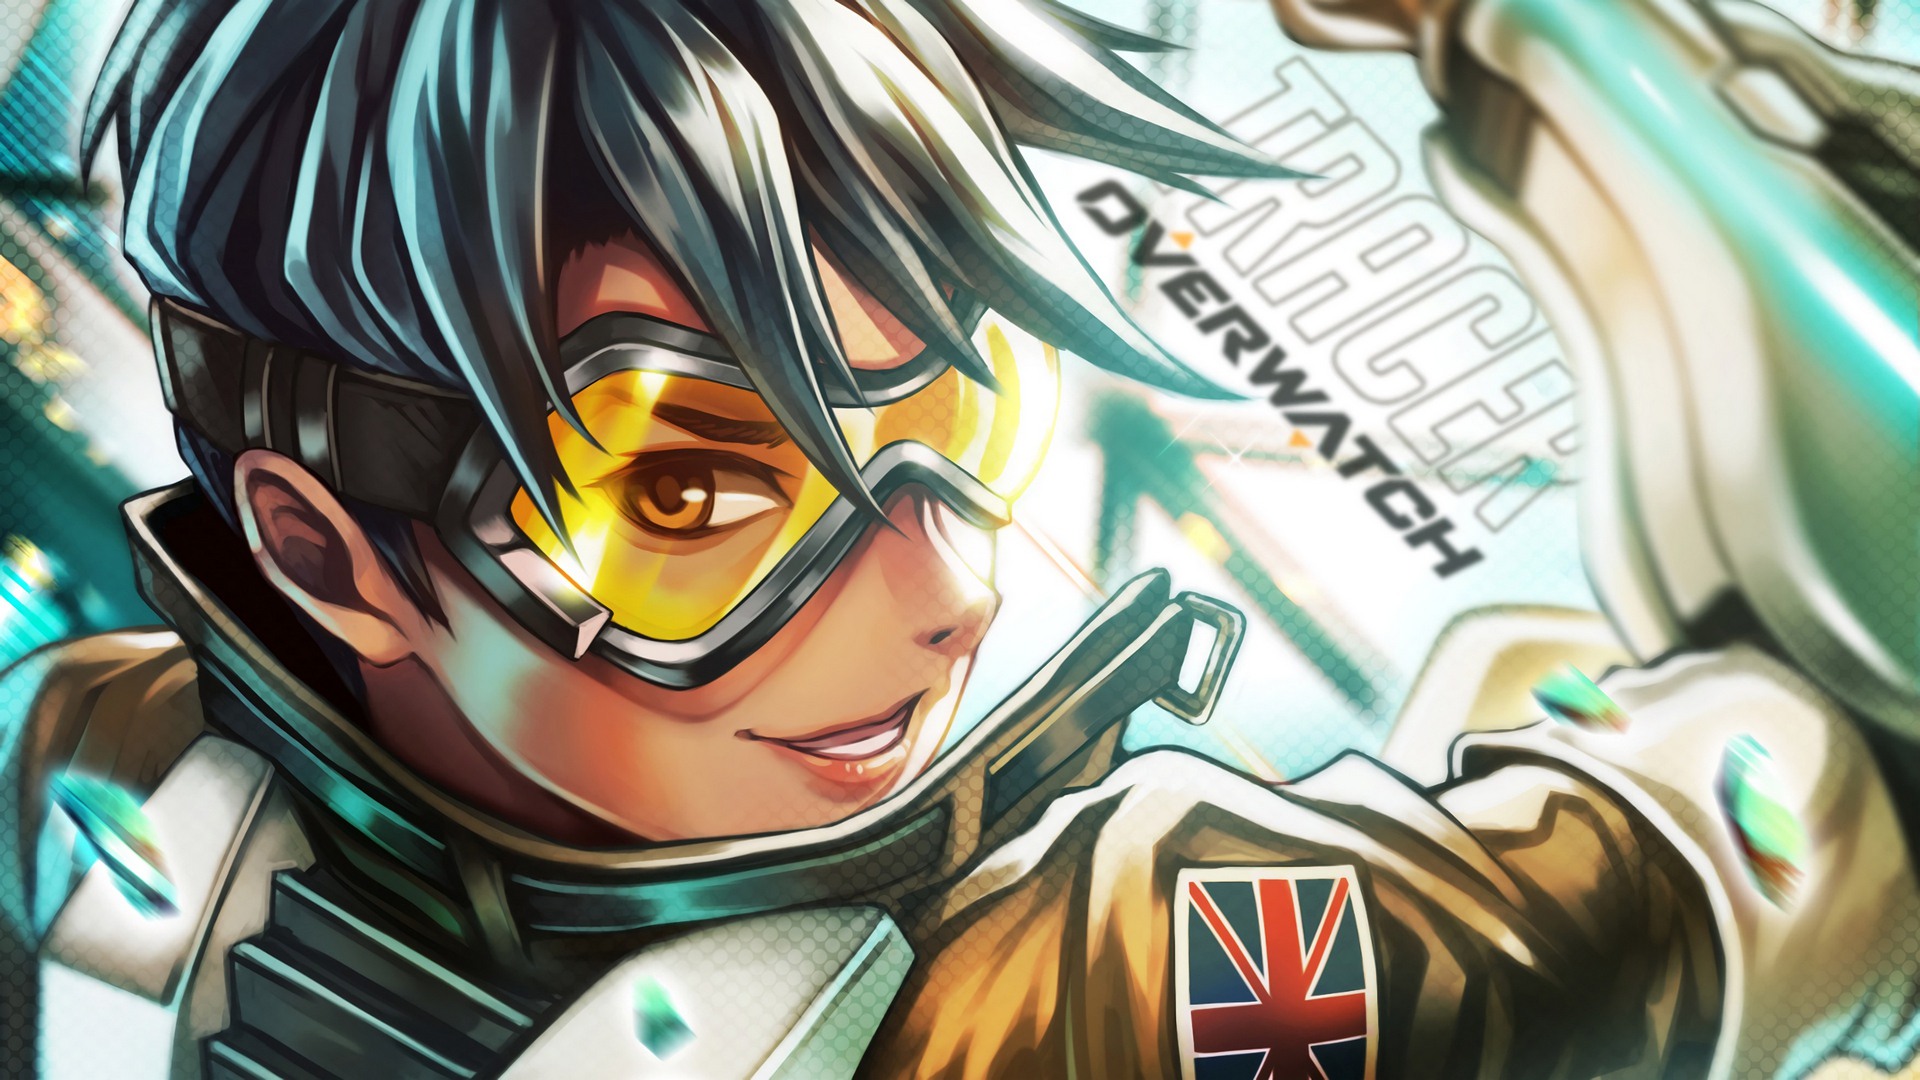 General 1920x1080 Overwatch Tracer (Overwatch) PC gaming artwork video game characters women